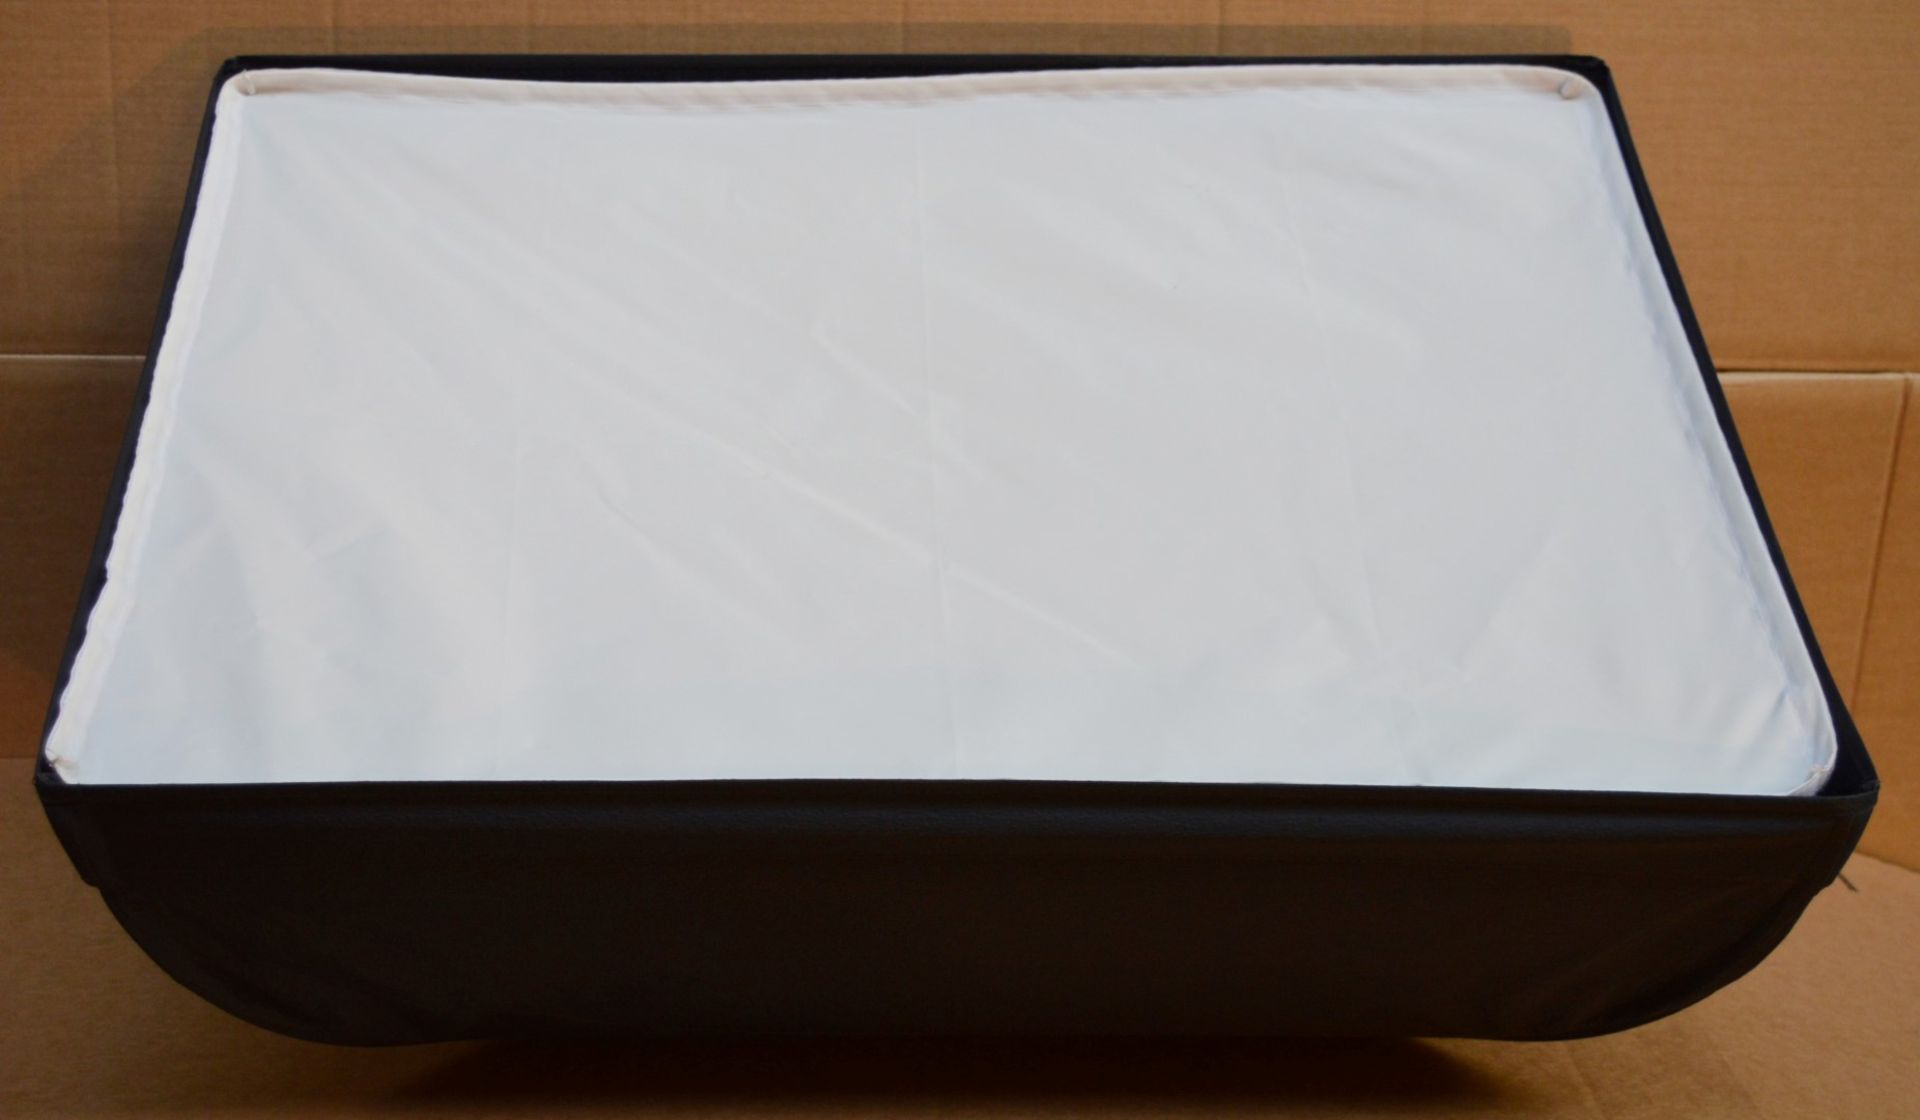 1 x Bowens Wafer Softbox - For Use With Esprit Flash Head - Professional Photography Equipment - - Image 5 of 8